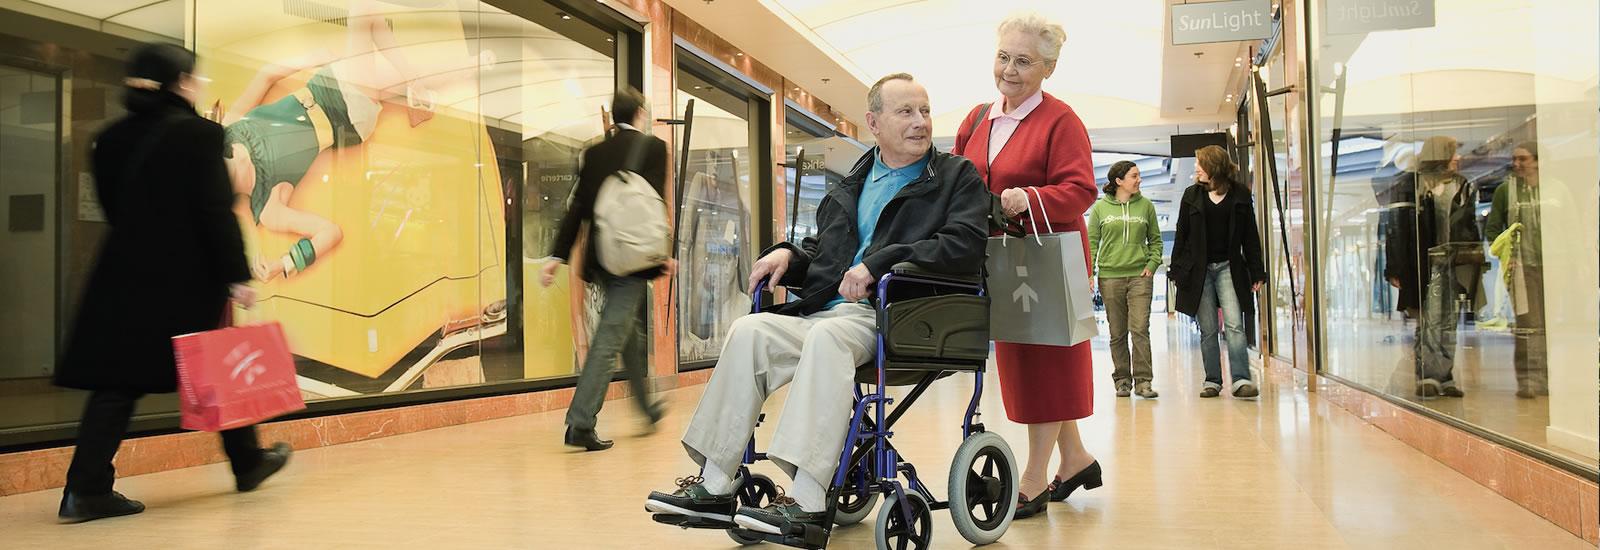 man being pushed while in a transport wheelchair